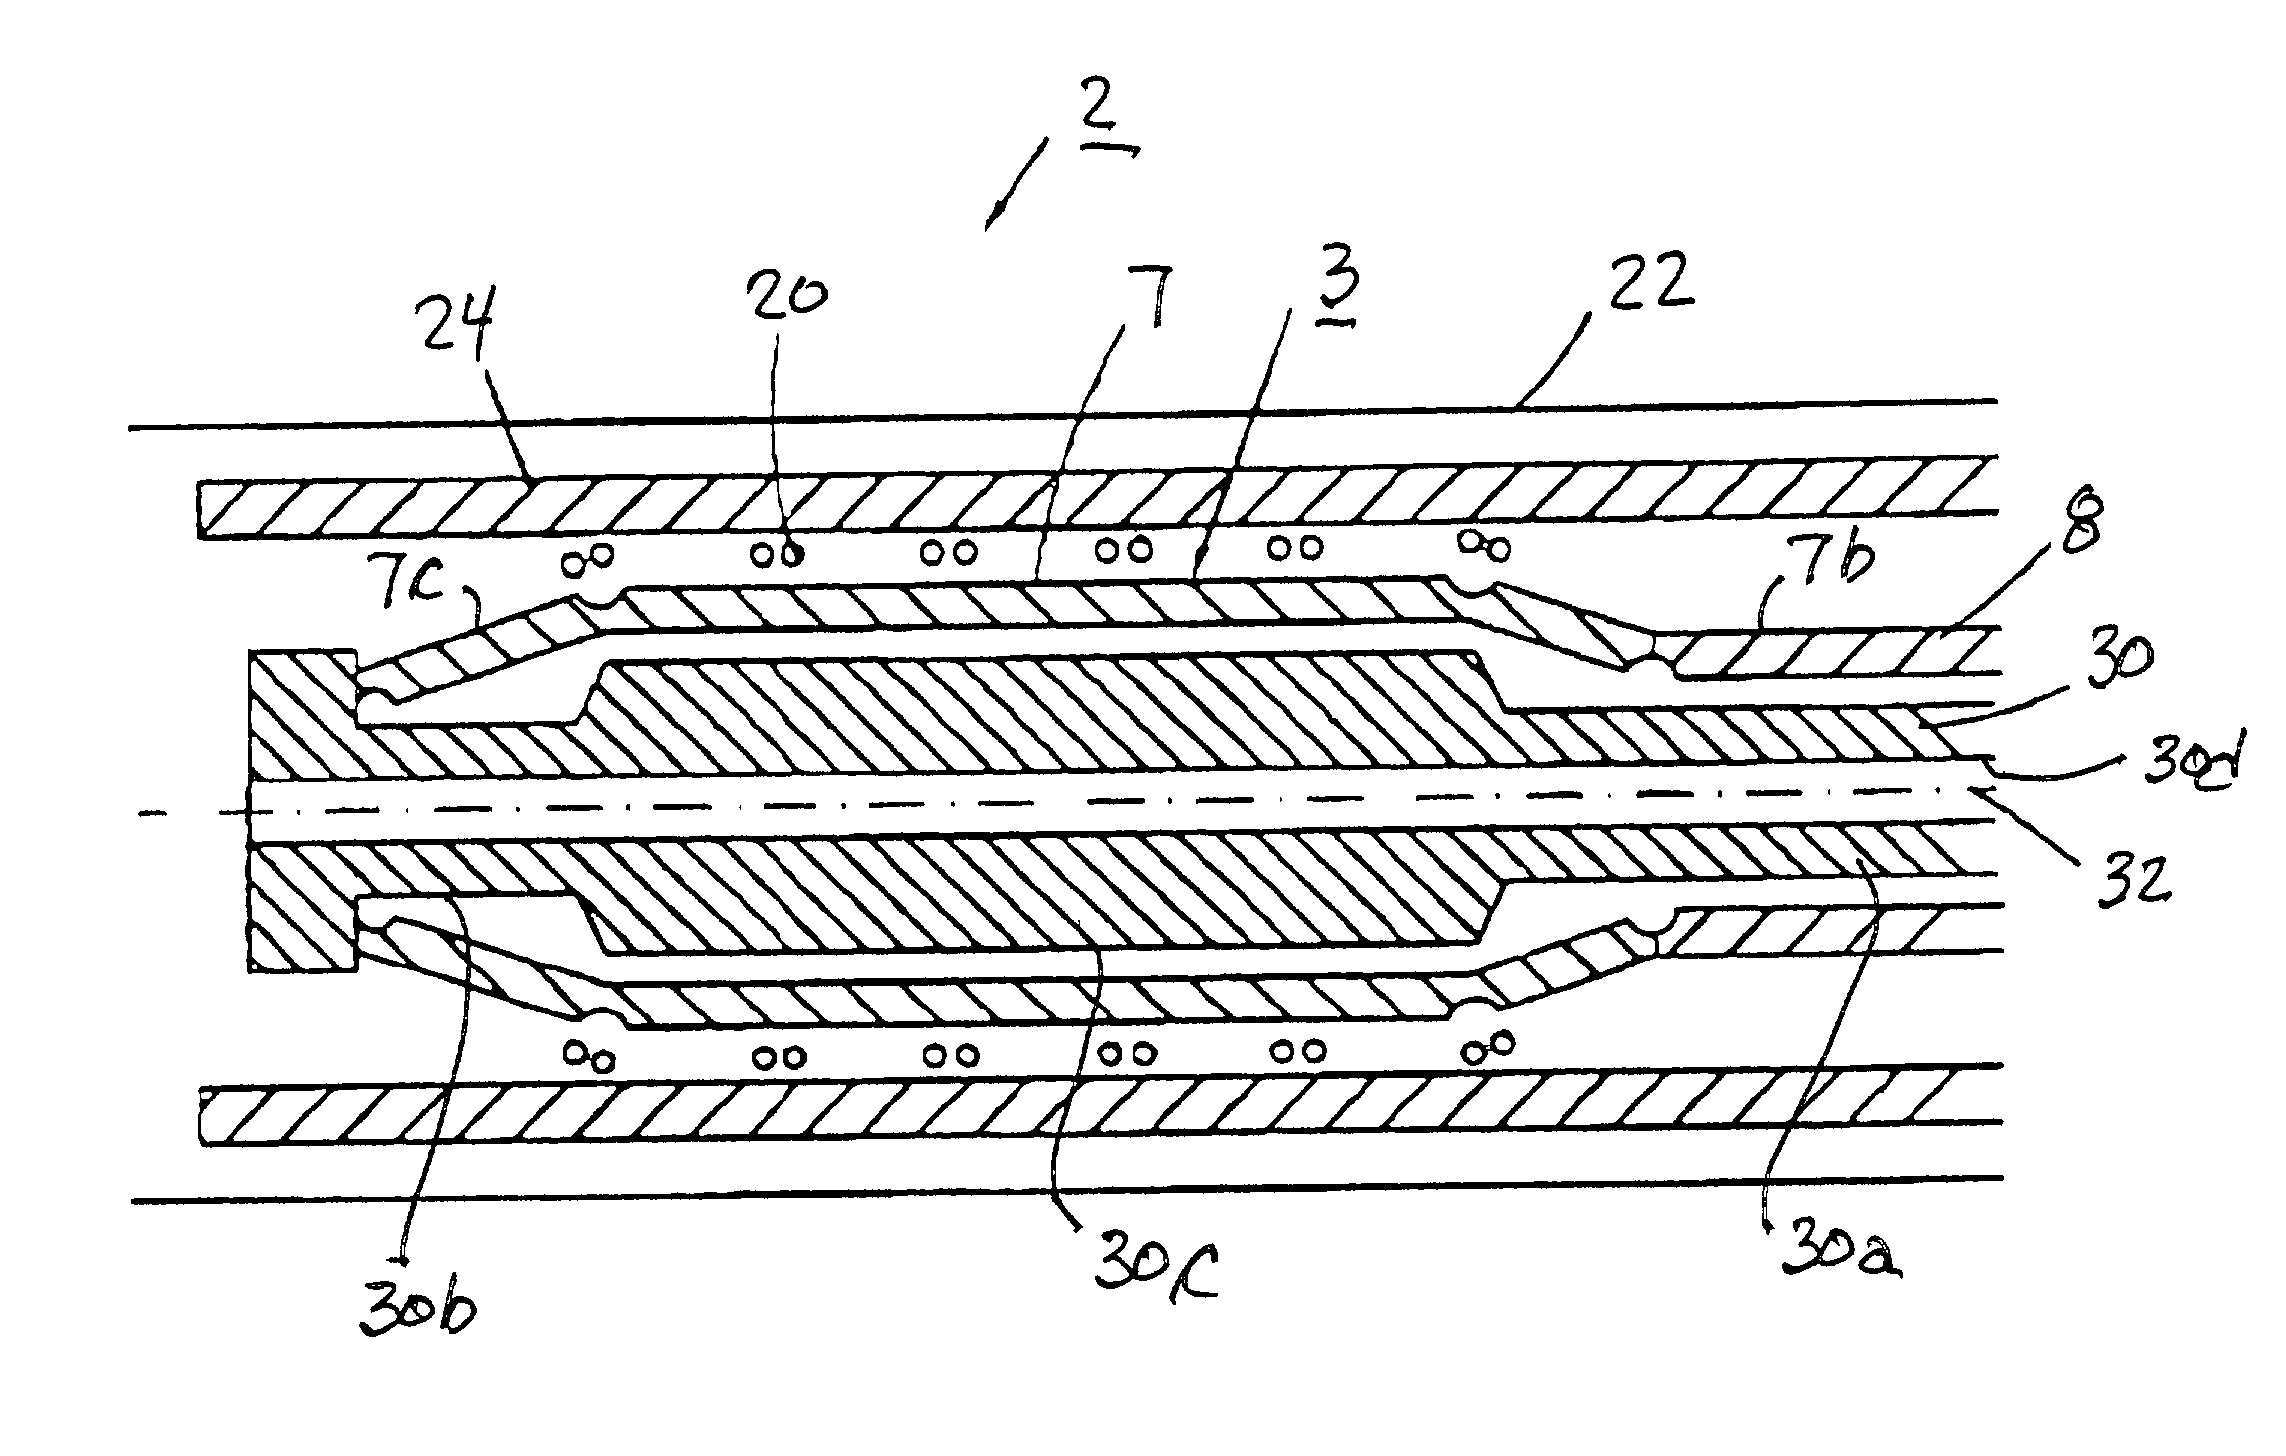 Expandable delivery appliance particularly for delivering intravascular devices